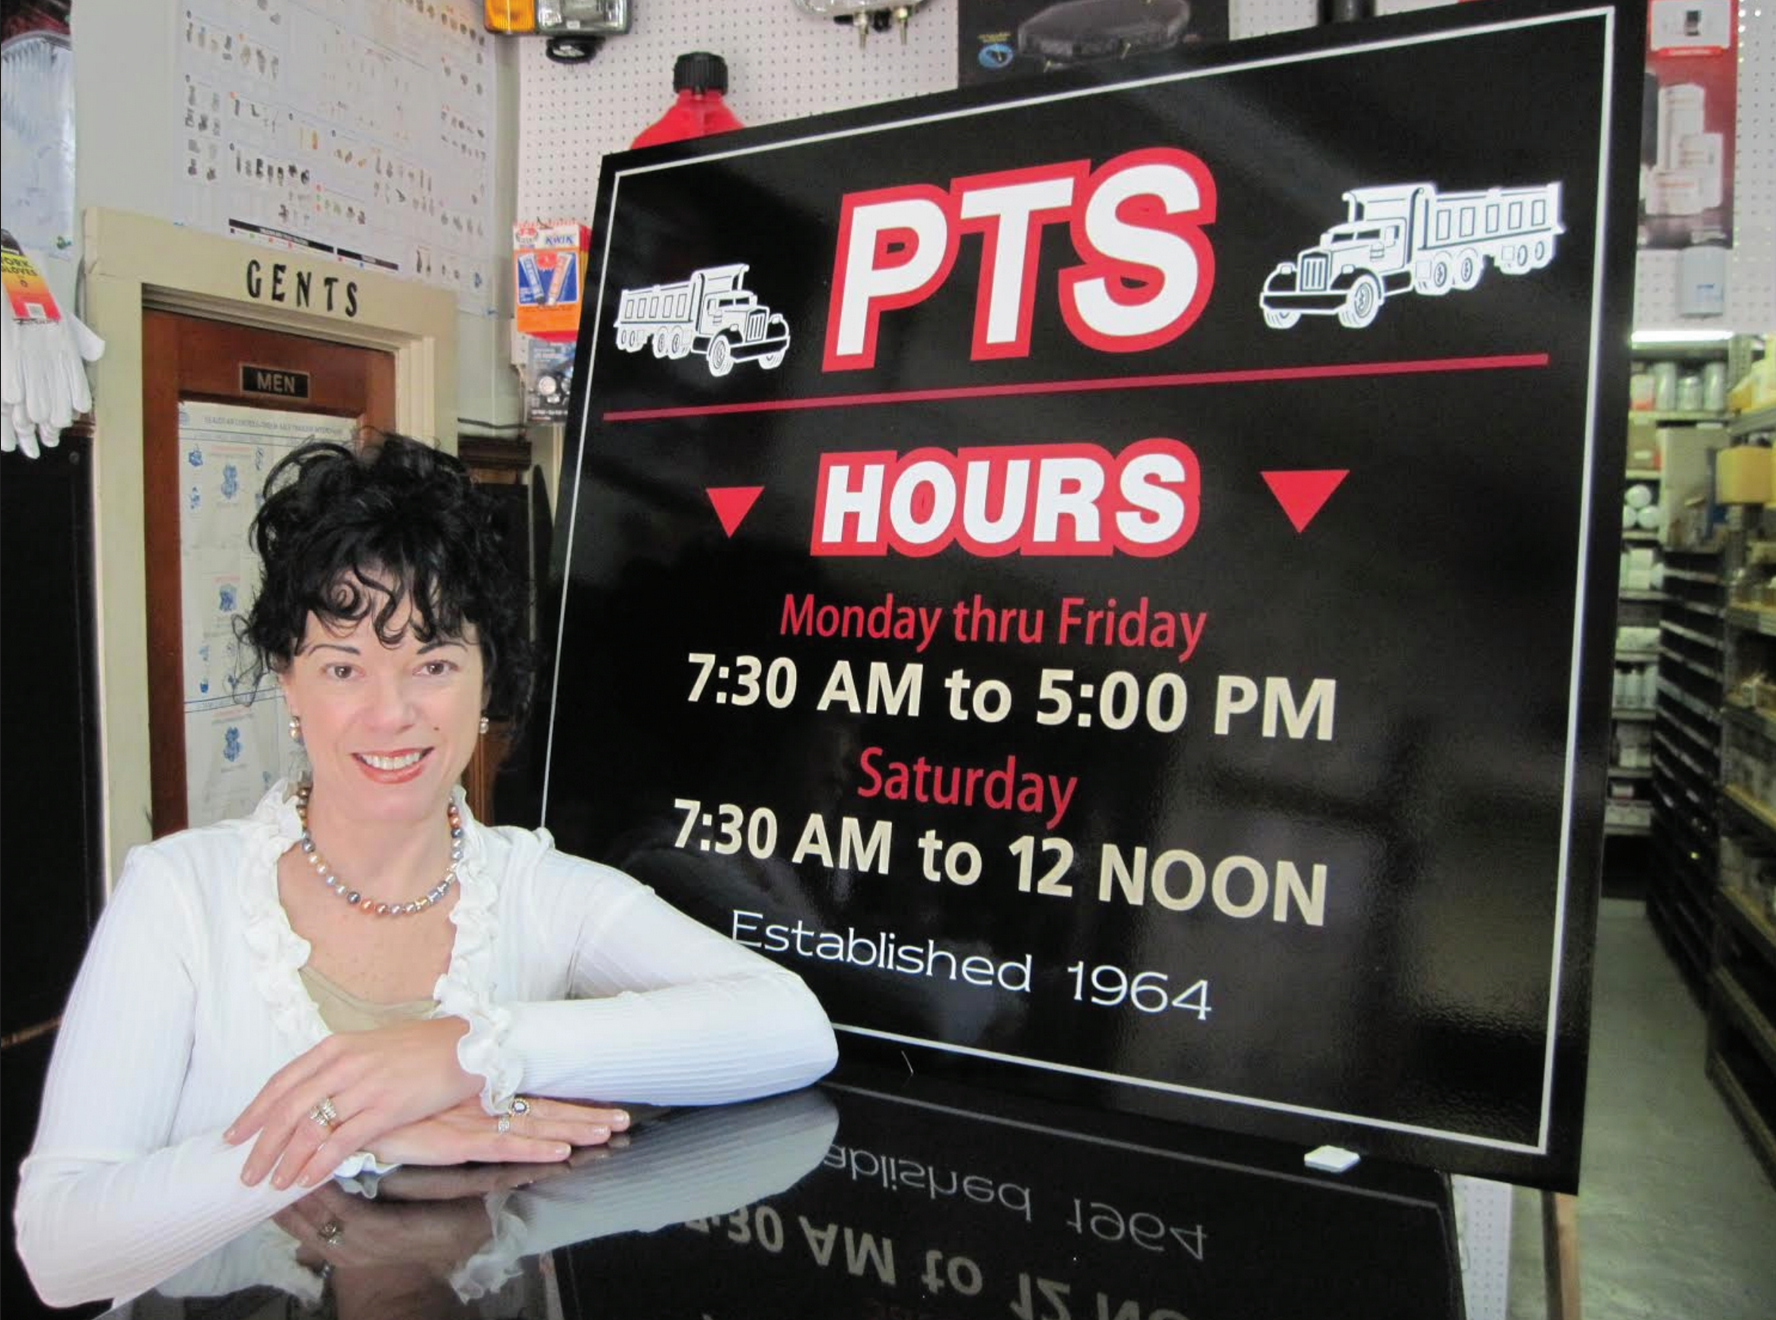 Elaine Boone, CEO of PTS Trucking, Trailer, and Construction Equipment Supply